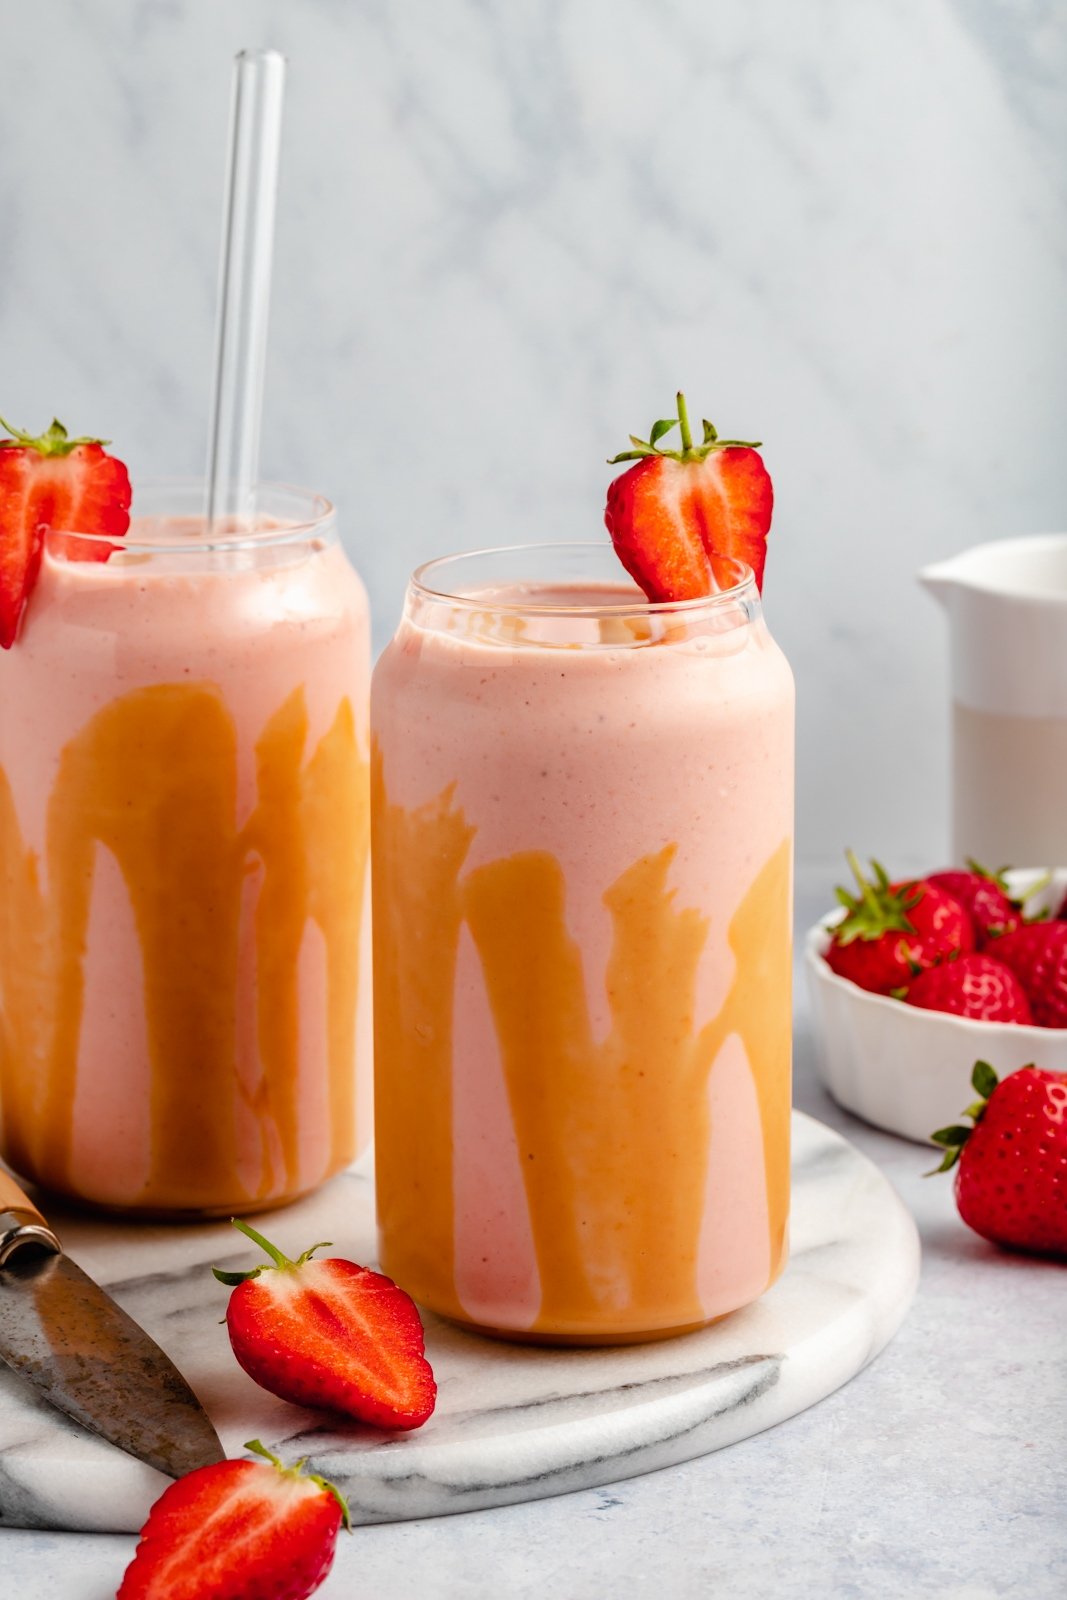 two strawberry banana peanut butter smoothies in glasses